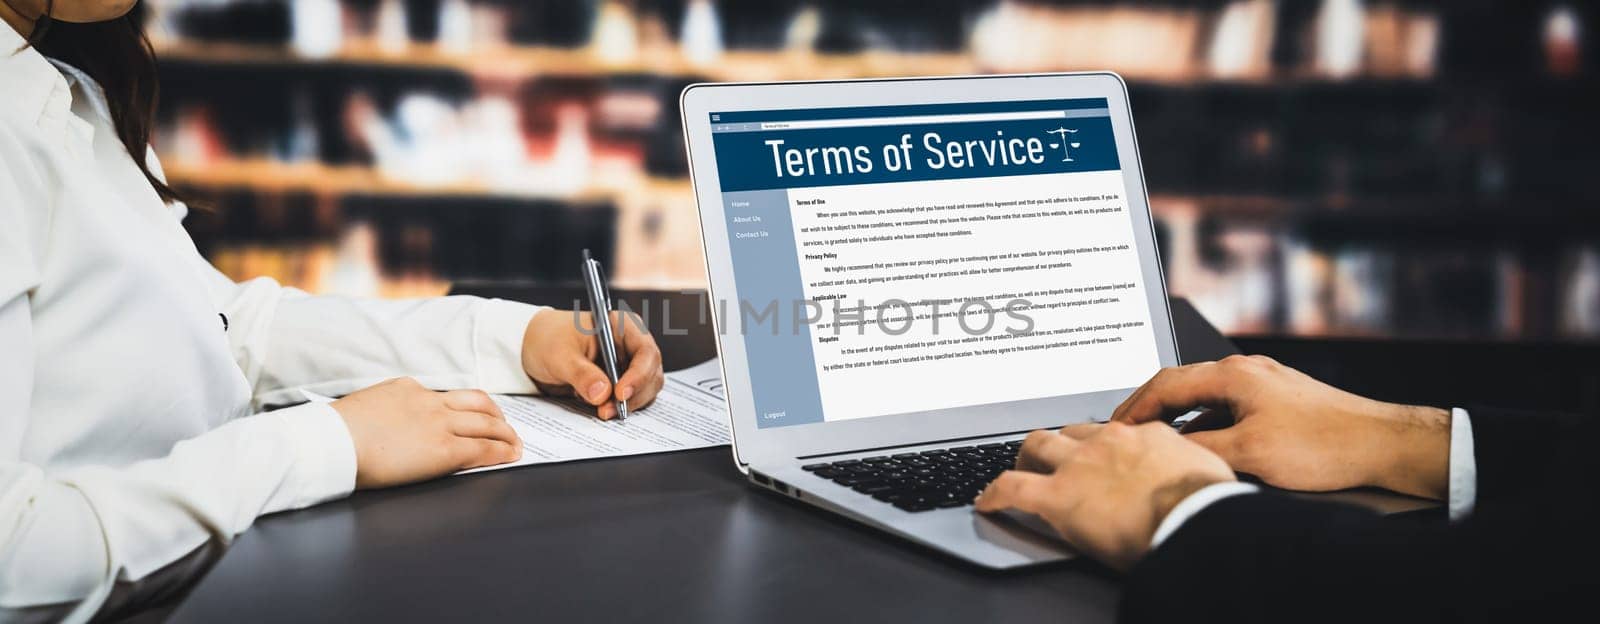 Online term of service conditions showing savvy rules and regulations in using the website on a laptop computer screen for users to make an agreement